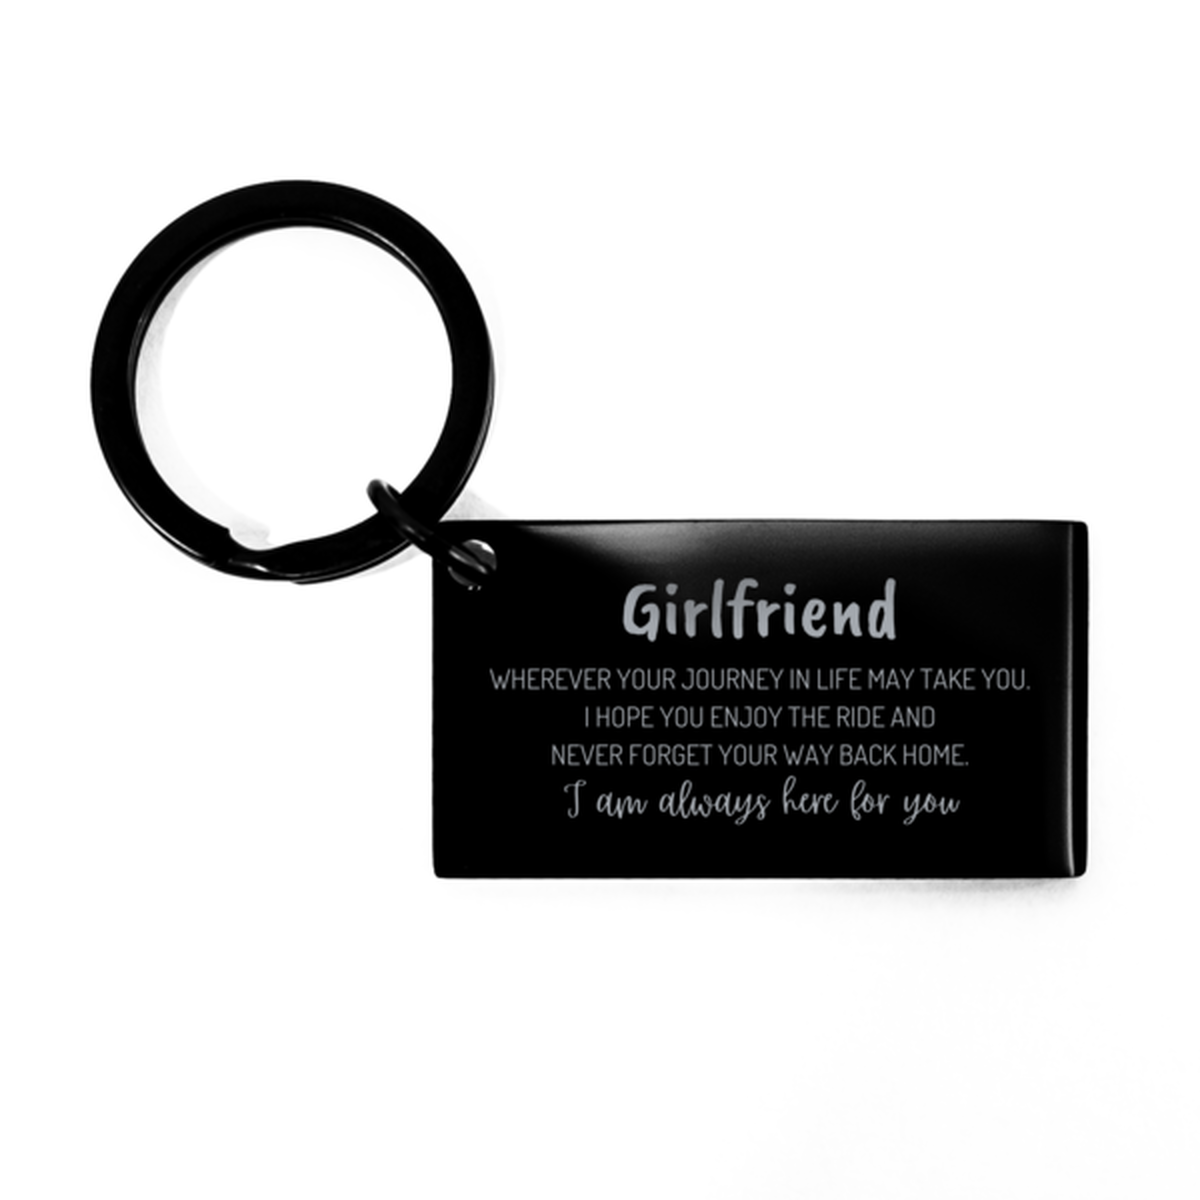 Girlfriend wherever your journey in life may take you, I am always here for you Girlfriend Keychain, Awesome Christmas Gifts For Girlfriend, Girlfriend Birthday Gifts for Men Women Family Loved One